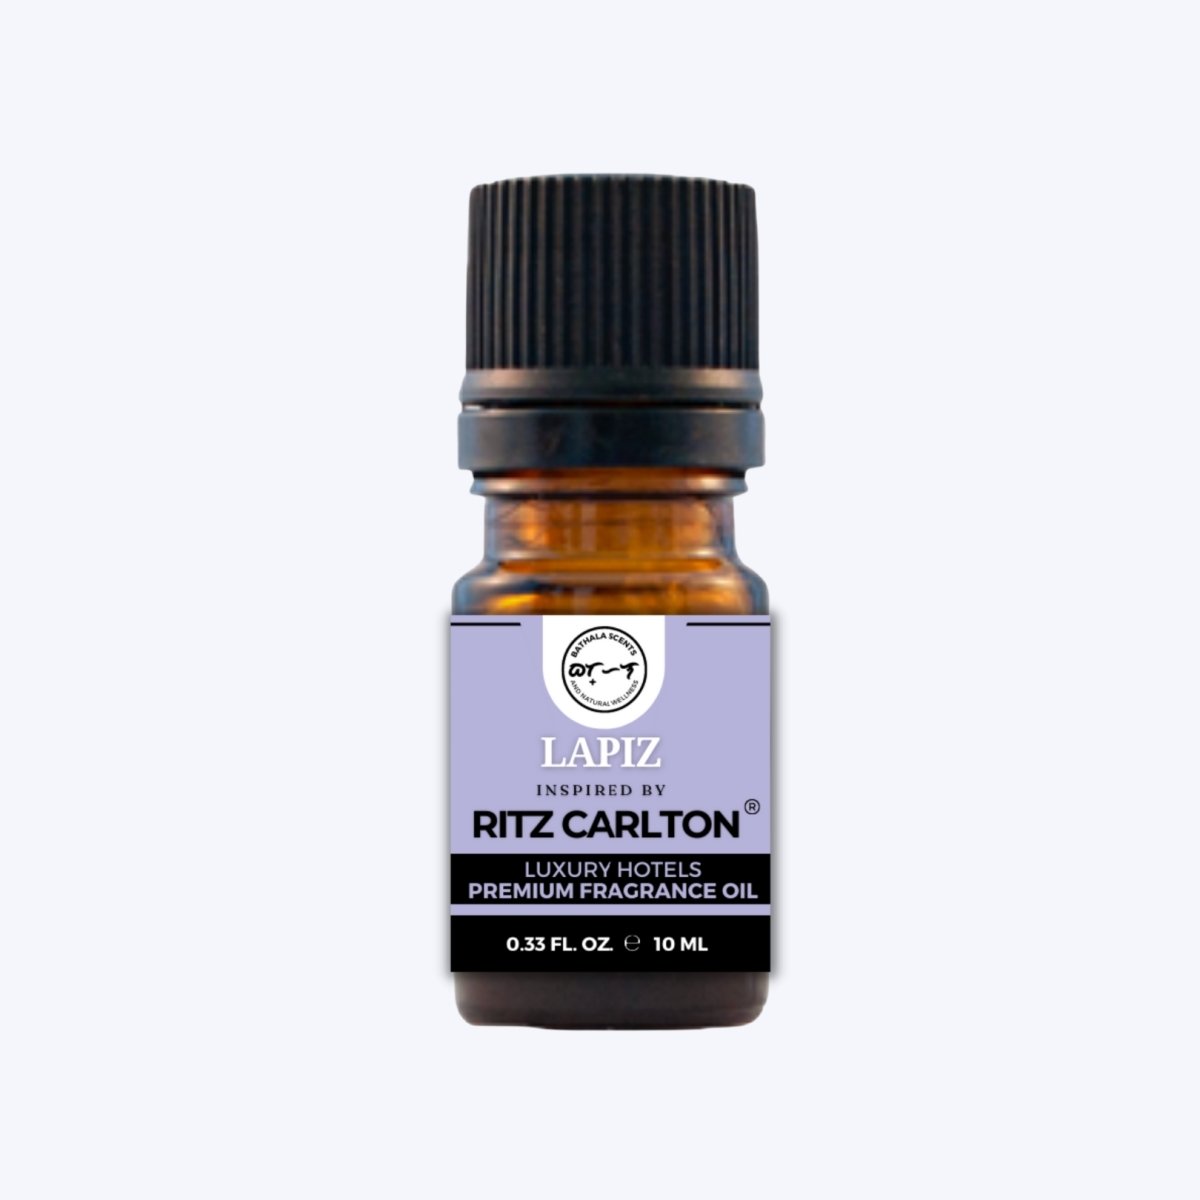 Lapiz Inspired by Ritz Carlton Luxury Hotels Fragrance Oil 10ml - Bathala Scents and Natural Wellness